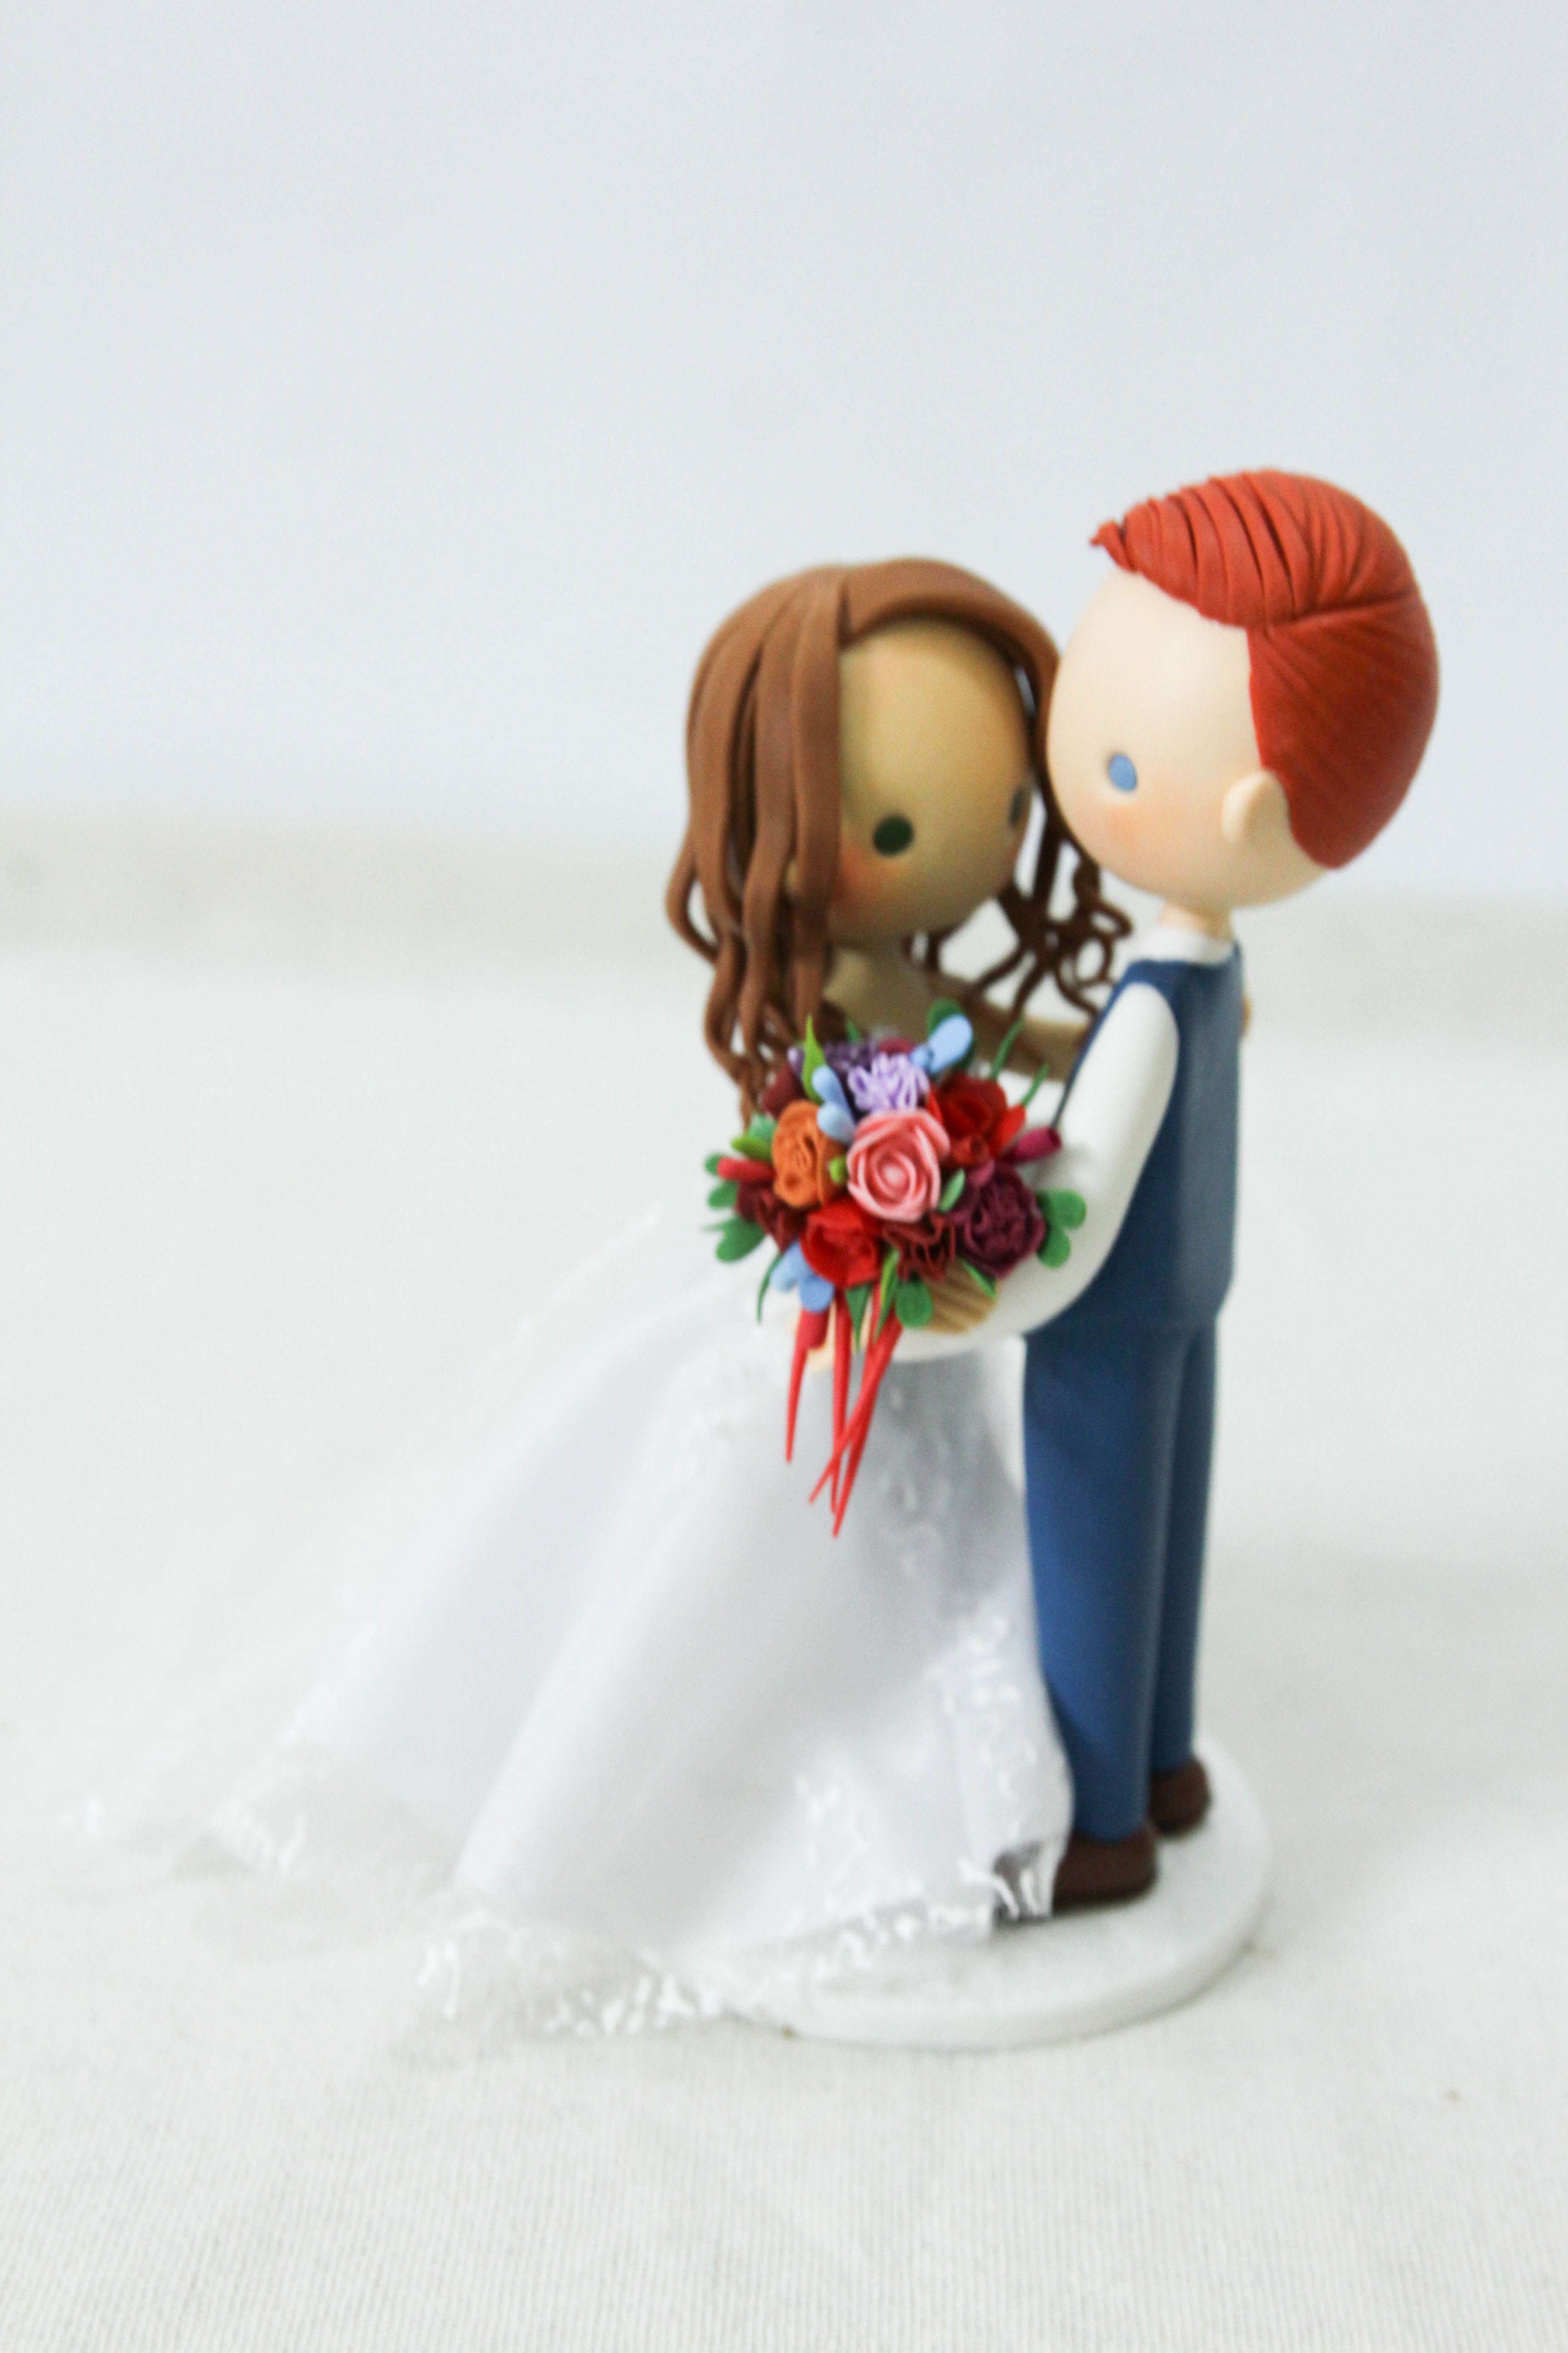 Picture of Garden Wedding Cake Topper, Rustic Wedding Cake Topper